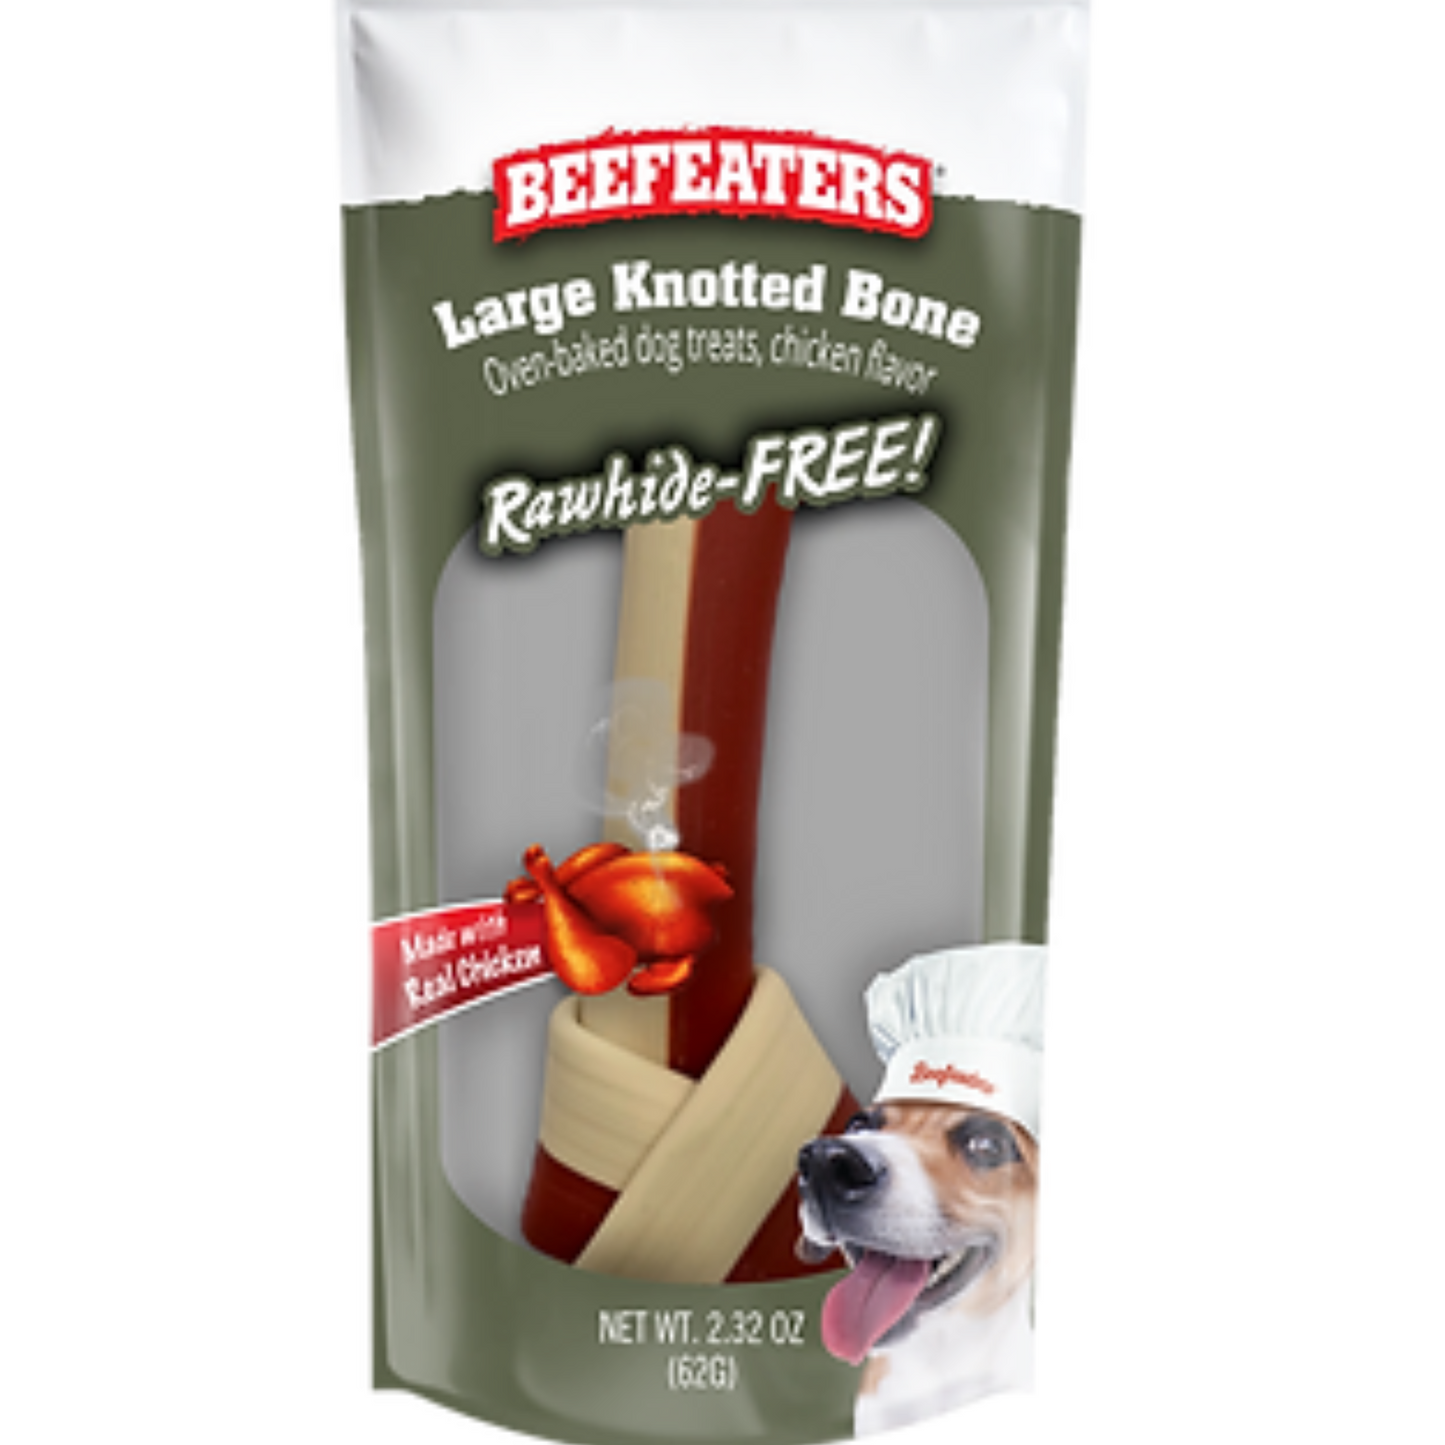 Beefeaters Rawhide Free Large Knotted Bone Chicken - DS